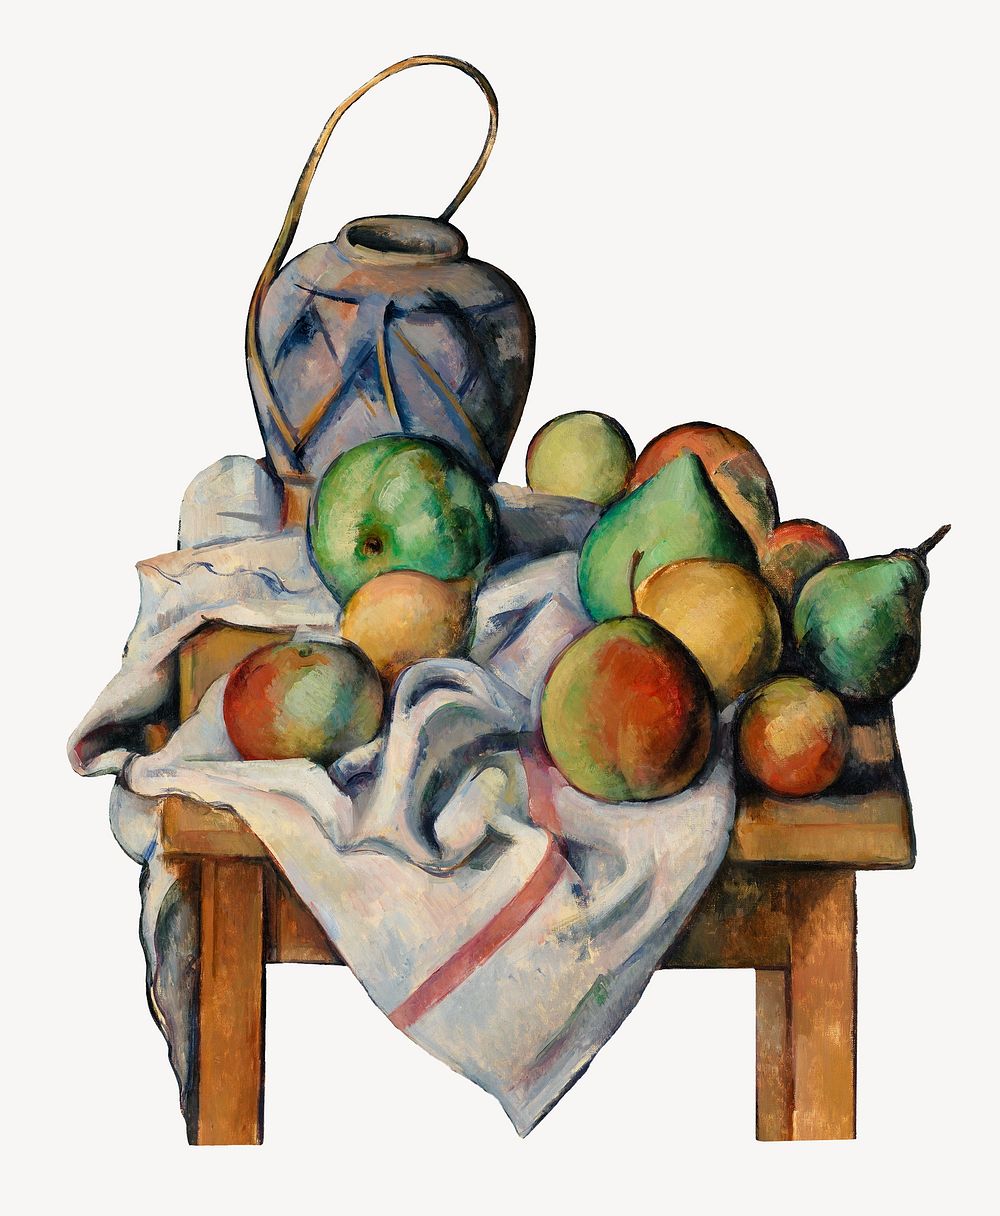 Paul Cezanne&rsquo;s Ginger Jar, still life painting.  Remixed by rawpixel.